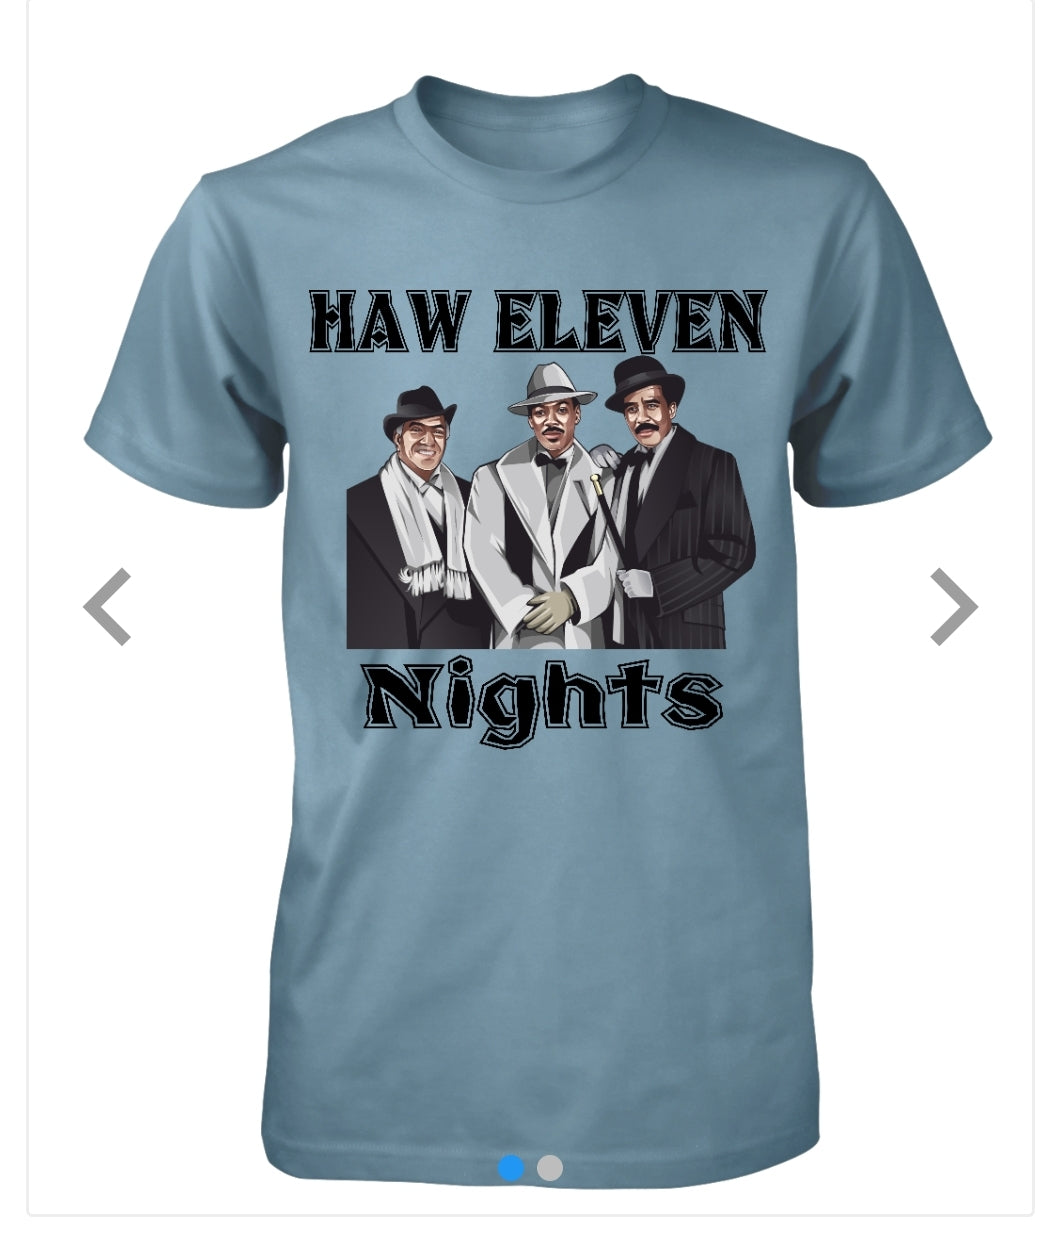 Haw Eleven Nights Collection Short Sleeve T-Shirt